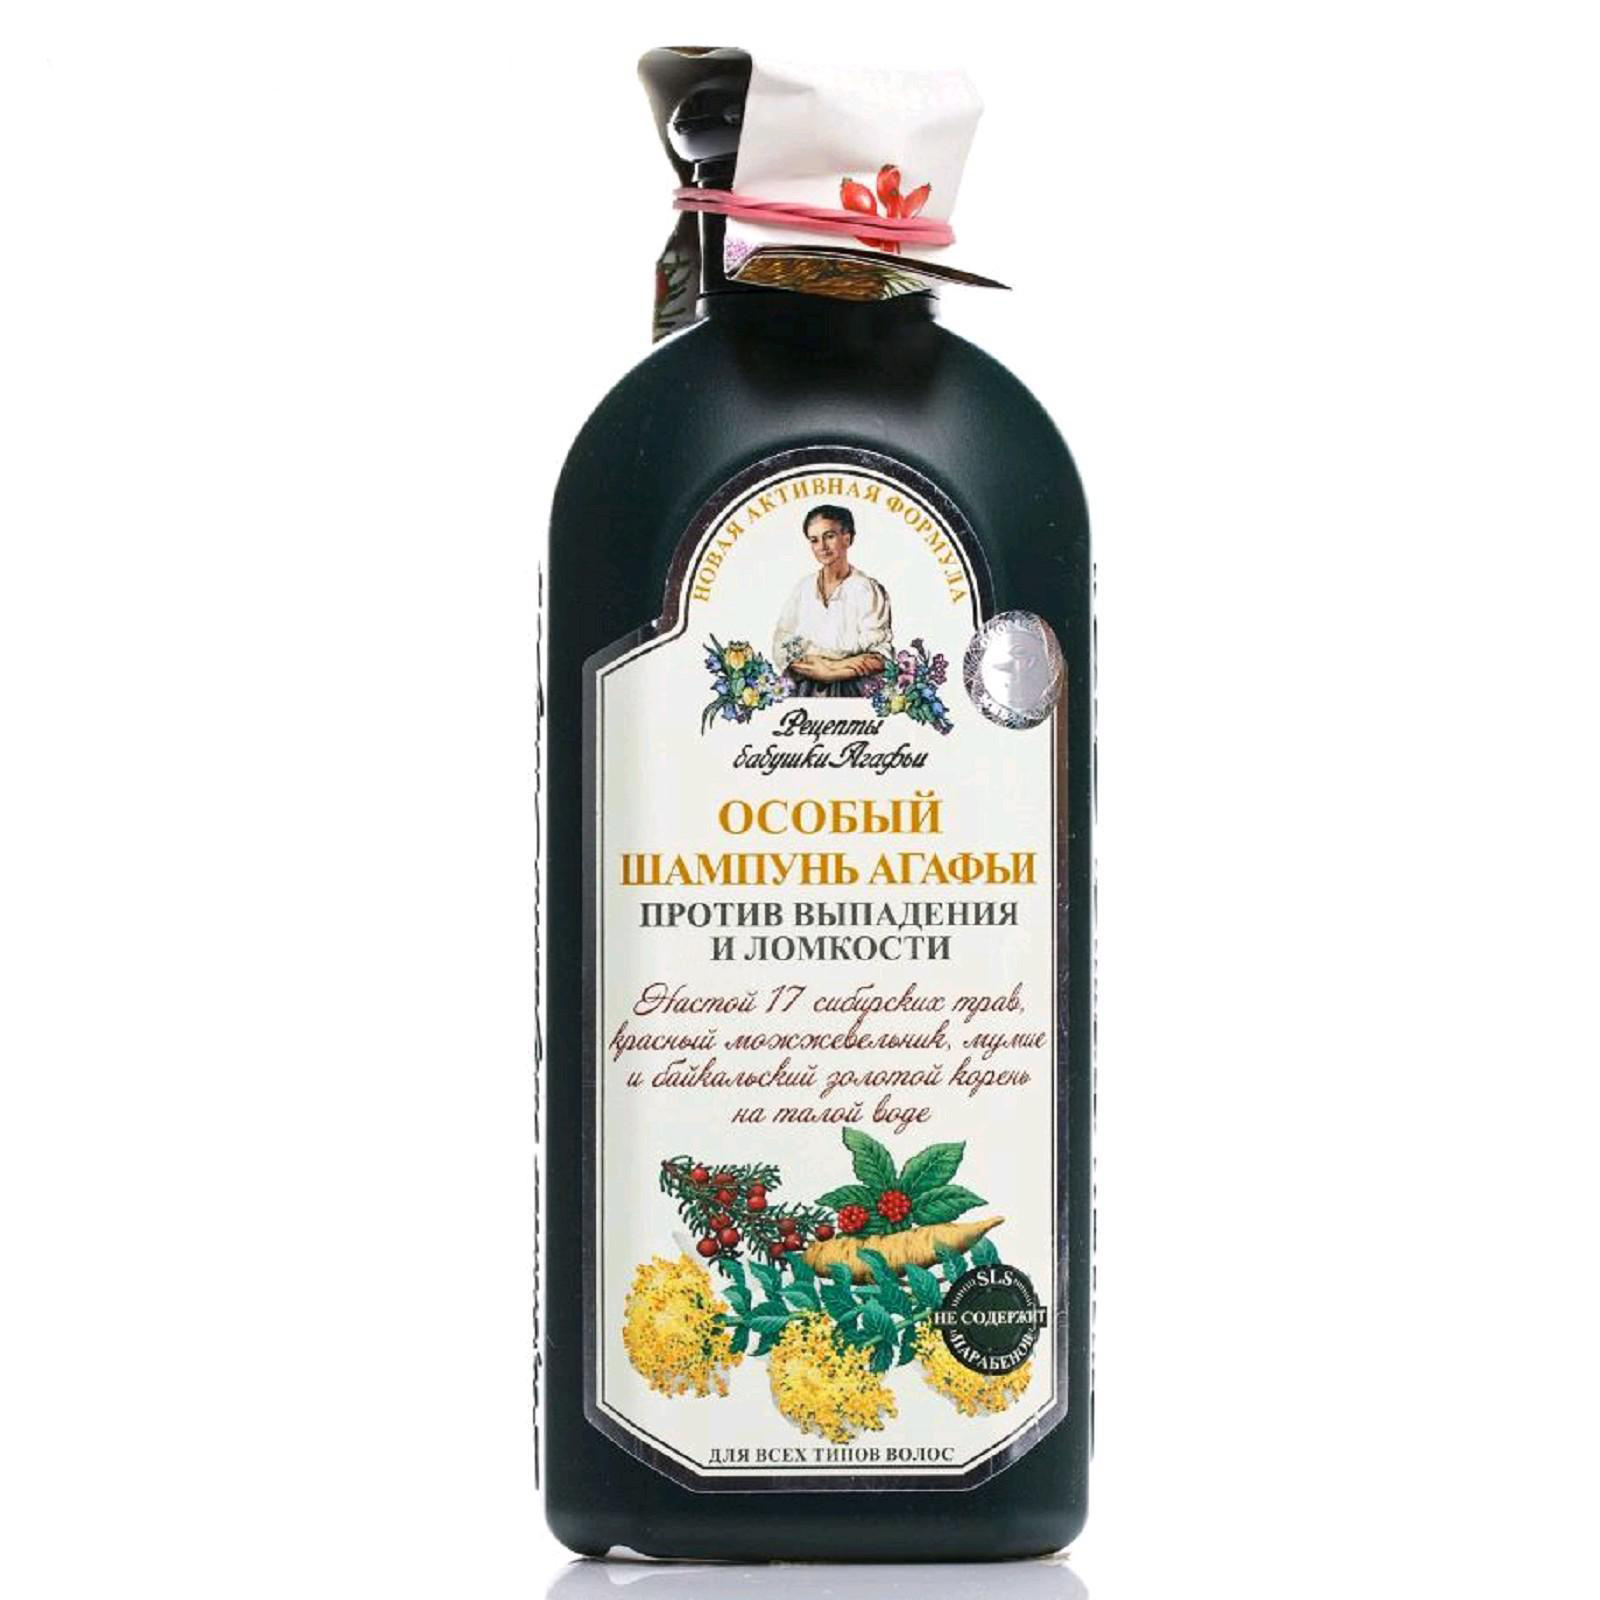 Shampoo Hair Loss/Brittle Hair Preventing w/ Shilajit and Herbs for All Hair Types, Recipes of Grandmother Agafya, 11.34 oz/ 350 Ml